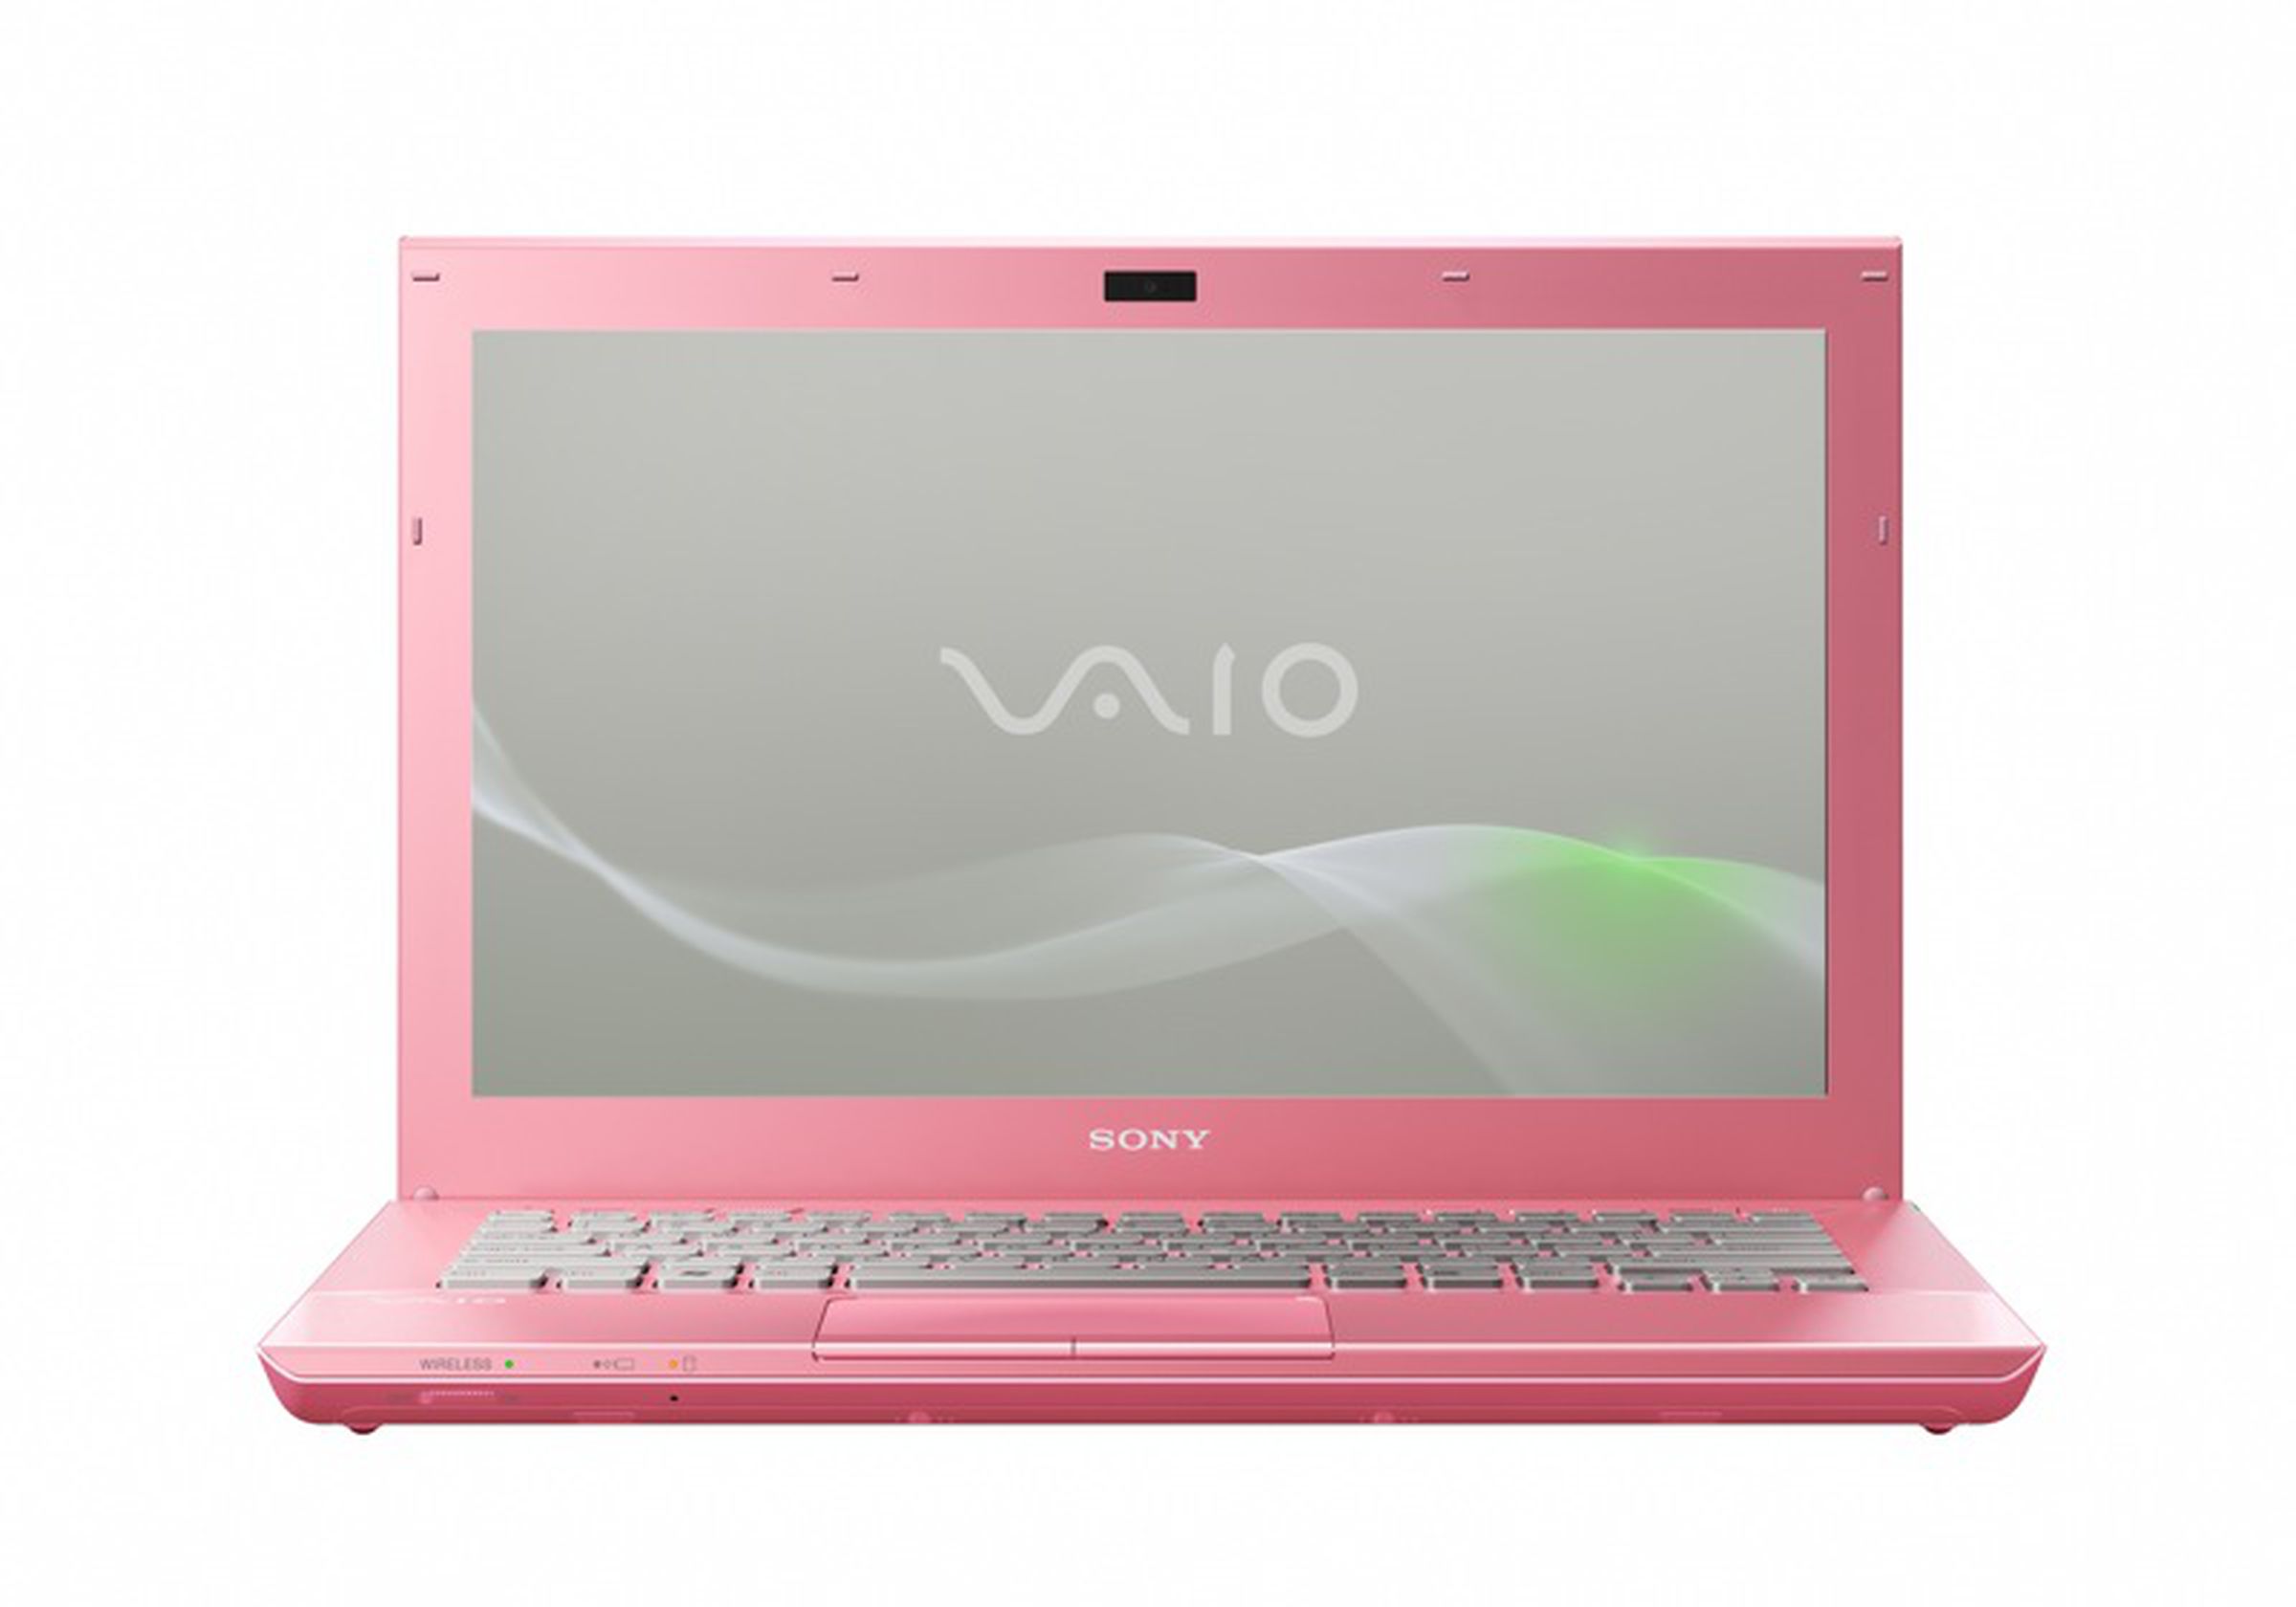 Sony VAIO SA and SB refreshed: the month of thin, powerful PCs continues!